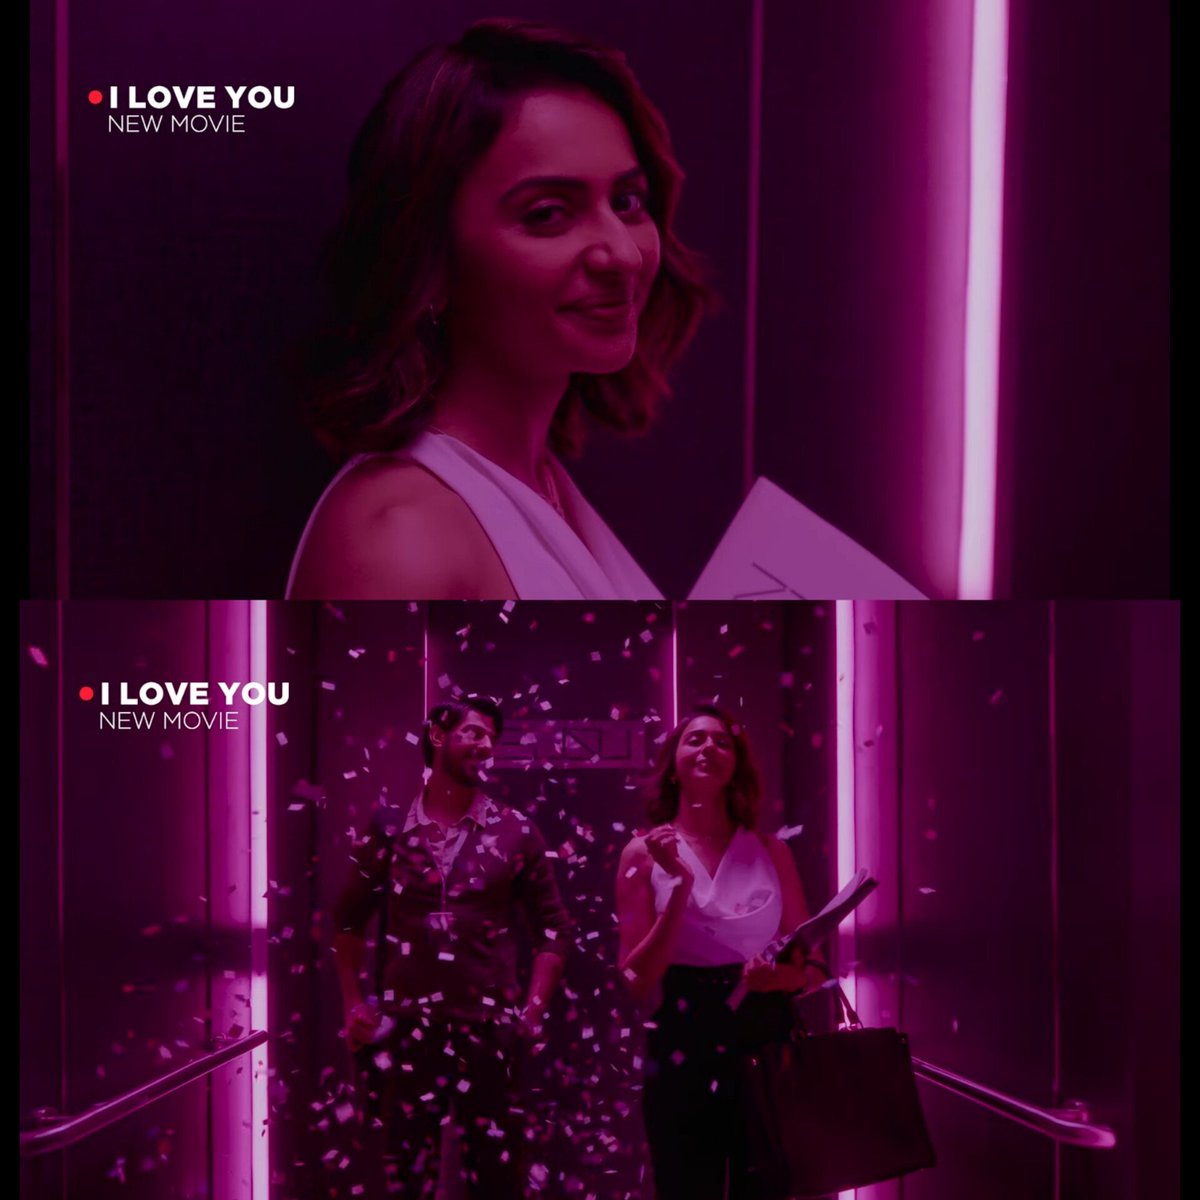 .@Rakulpreet's look in the romantic-thriller #ILoveYou, where she headlines the project again after #Chhatriwali. It will be premiering on @jiostudios at a locked date! Directed by award winning director @iamnm. 
💜 #RakulPreetSingh